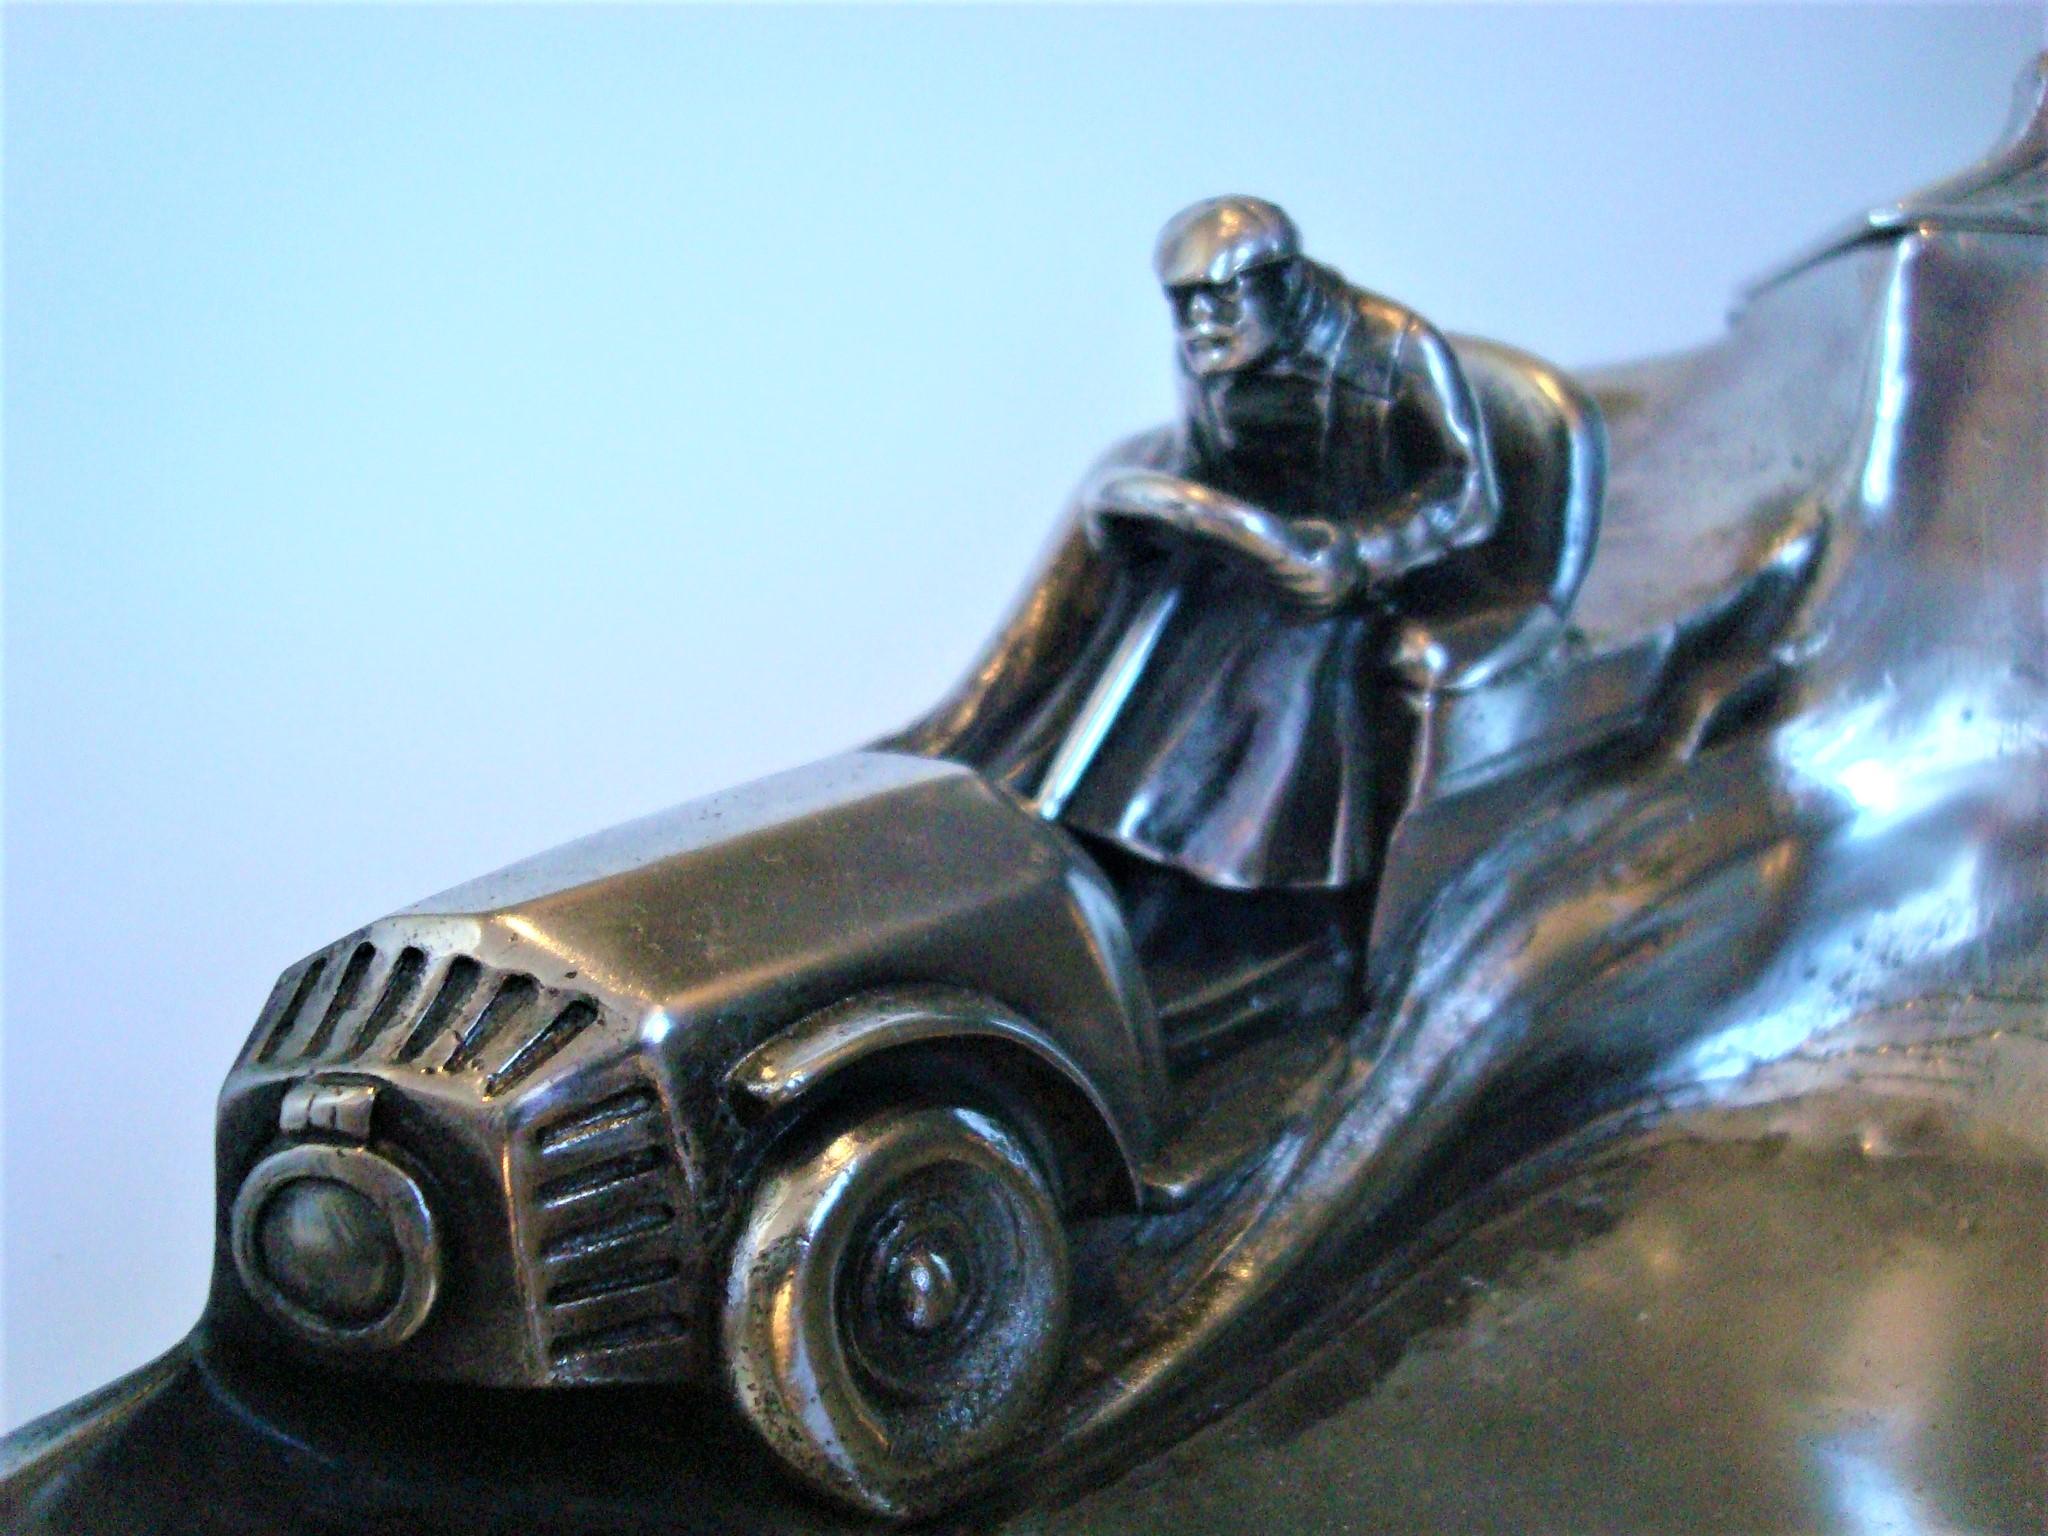 Pewter Early Racing Car Sculpture Desk Piece / Inkwell, ca. 1905-1915 Automobilia